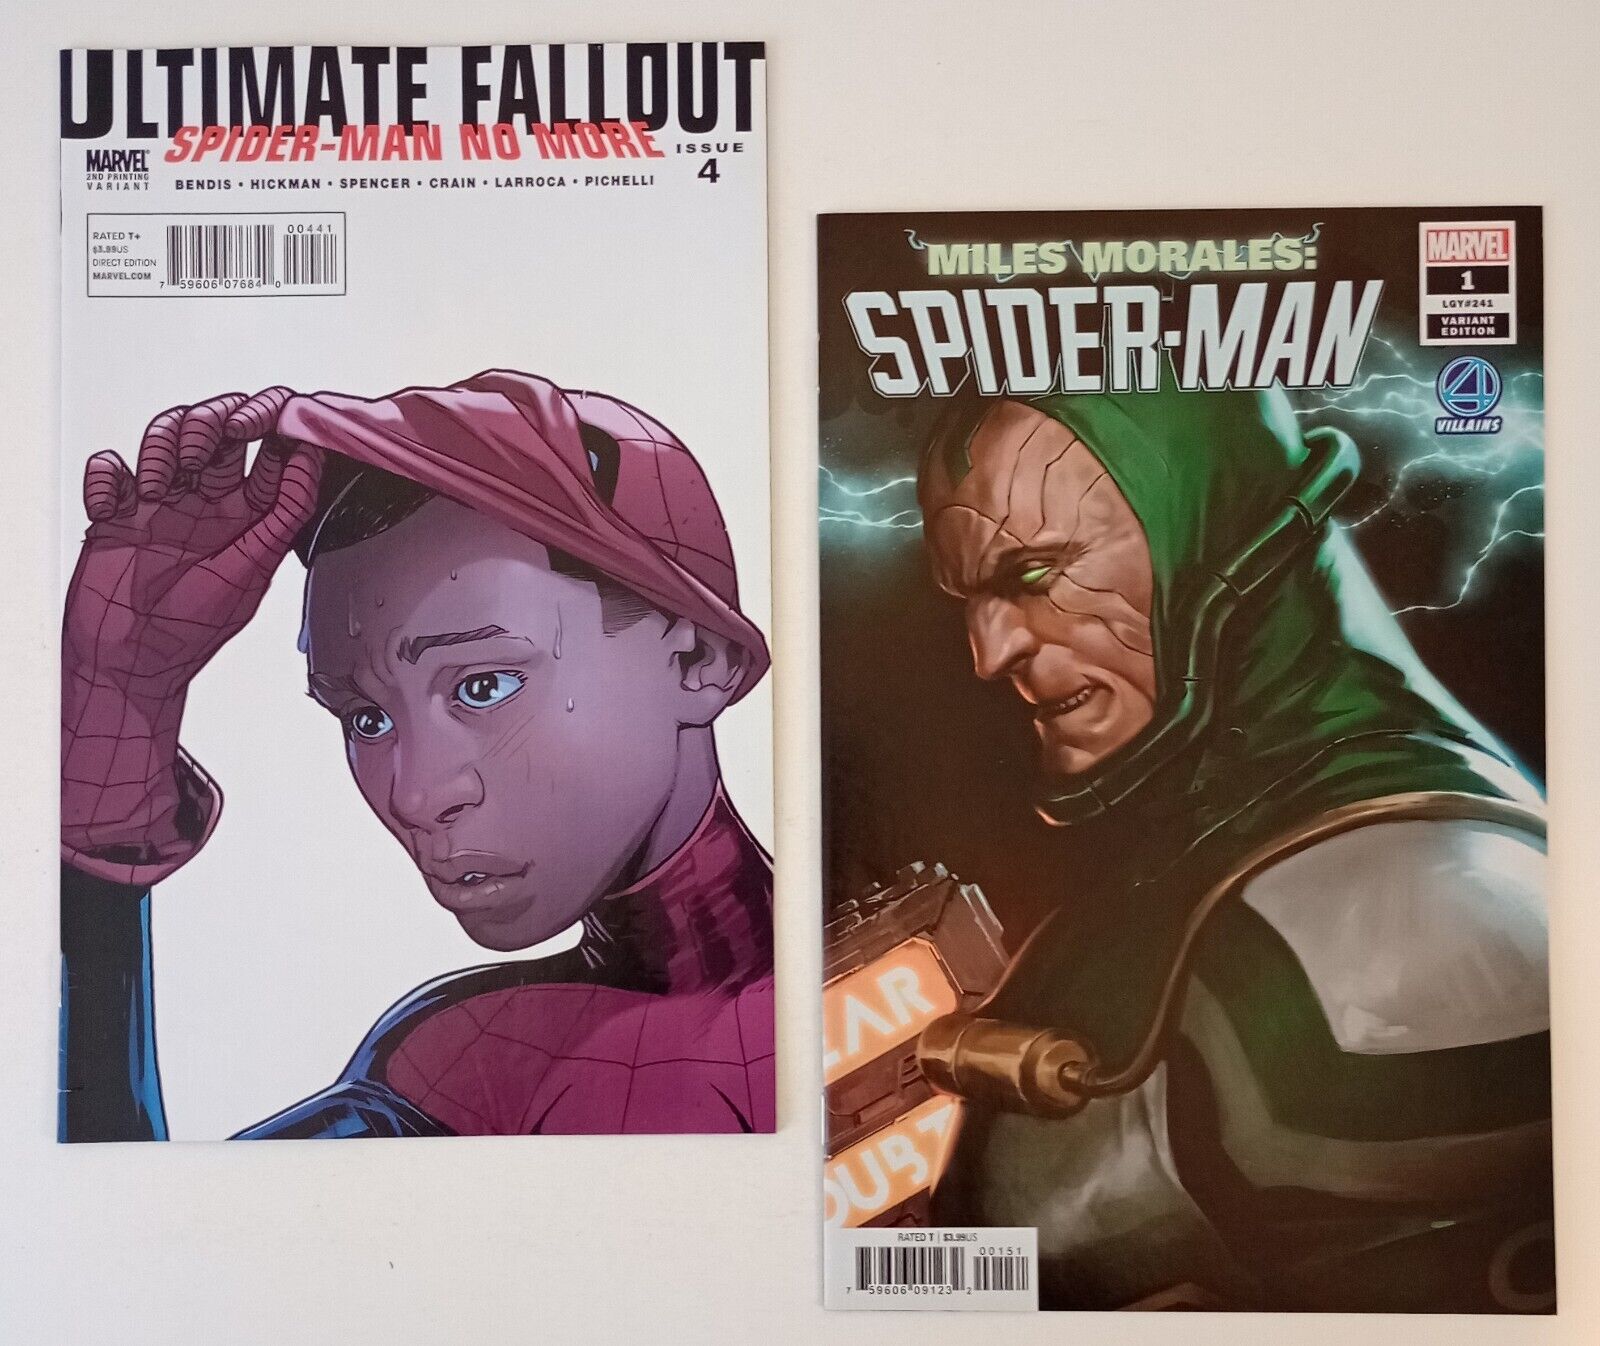 Ultimate Fallout #4 & Miles Morales #1 (1st appearance of Miles Morales) 